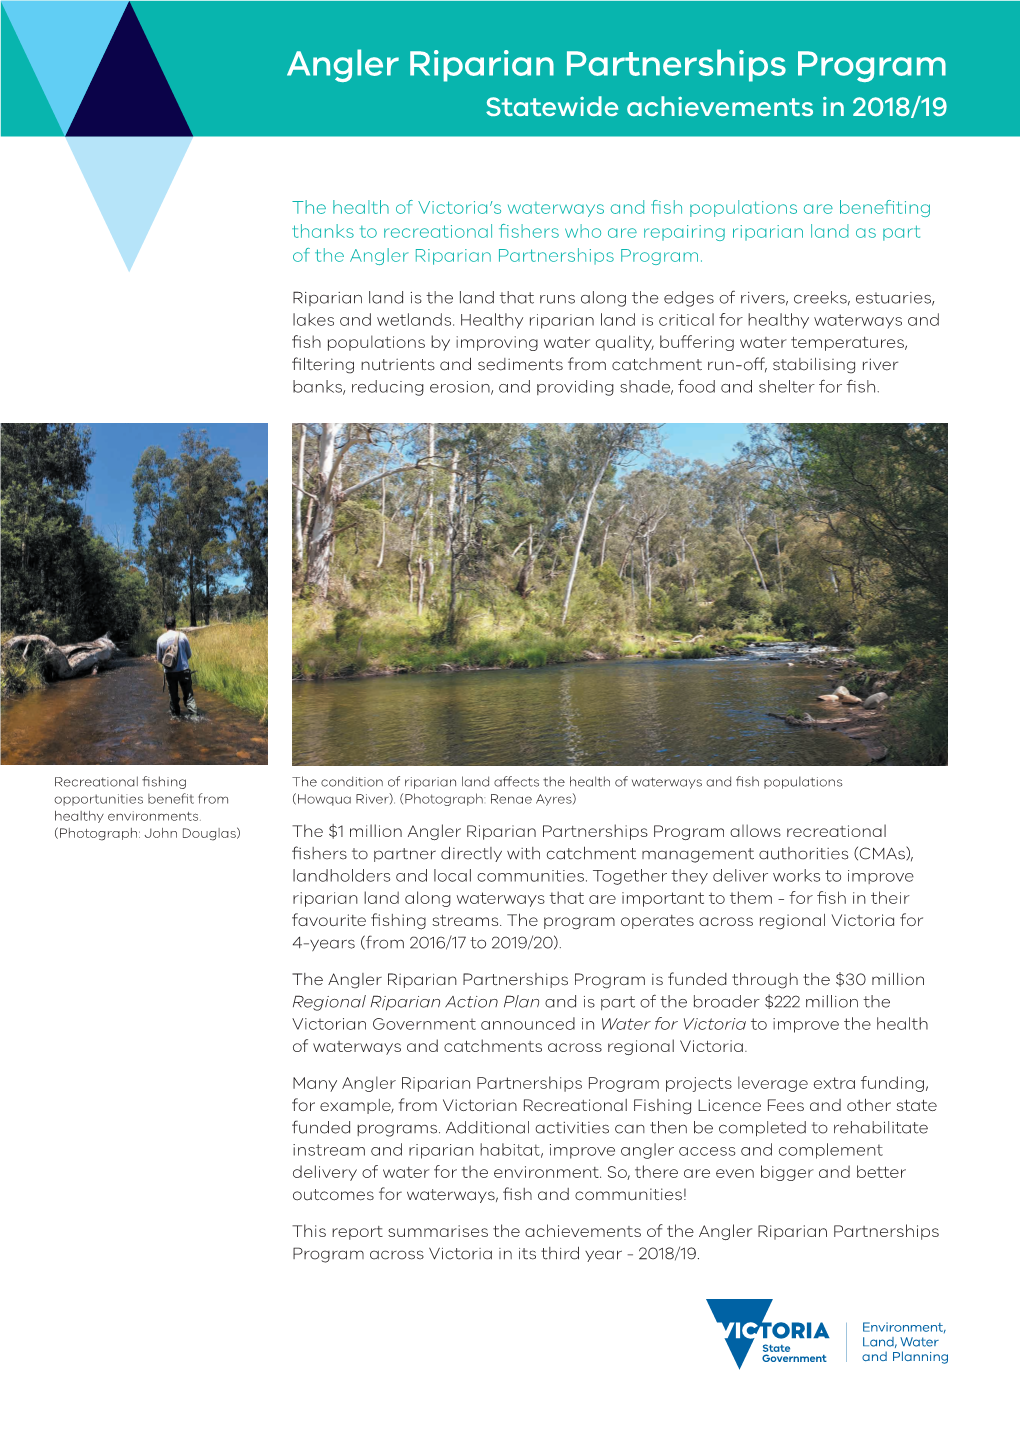 Angler Riparian Partnerships Program Statewide Achievements in 2018/19